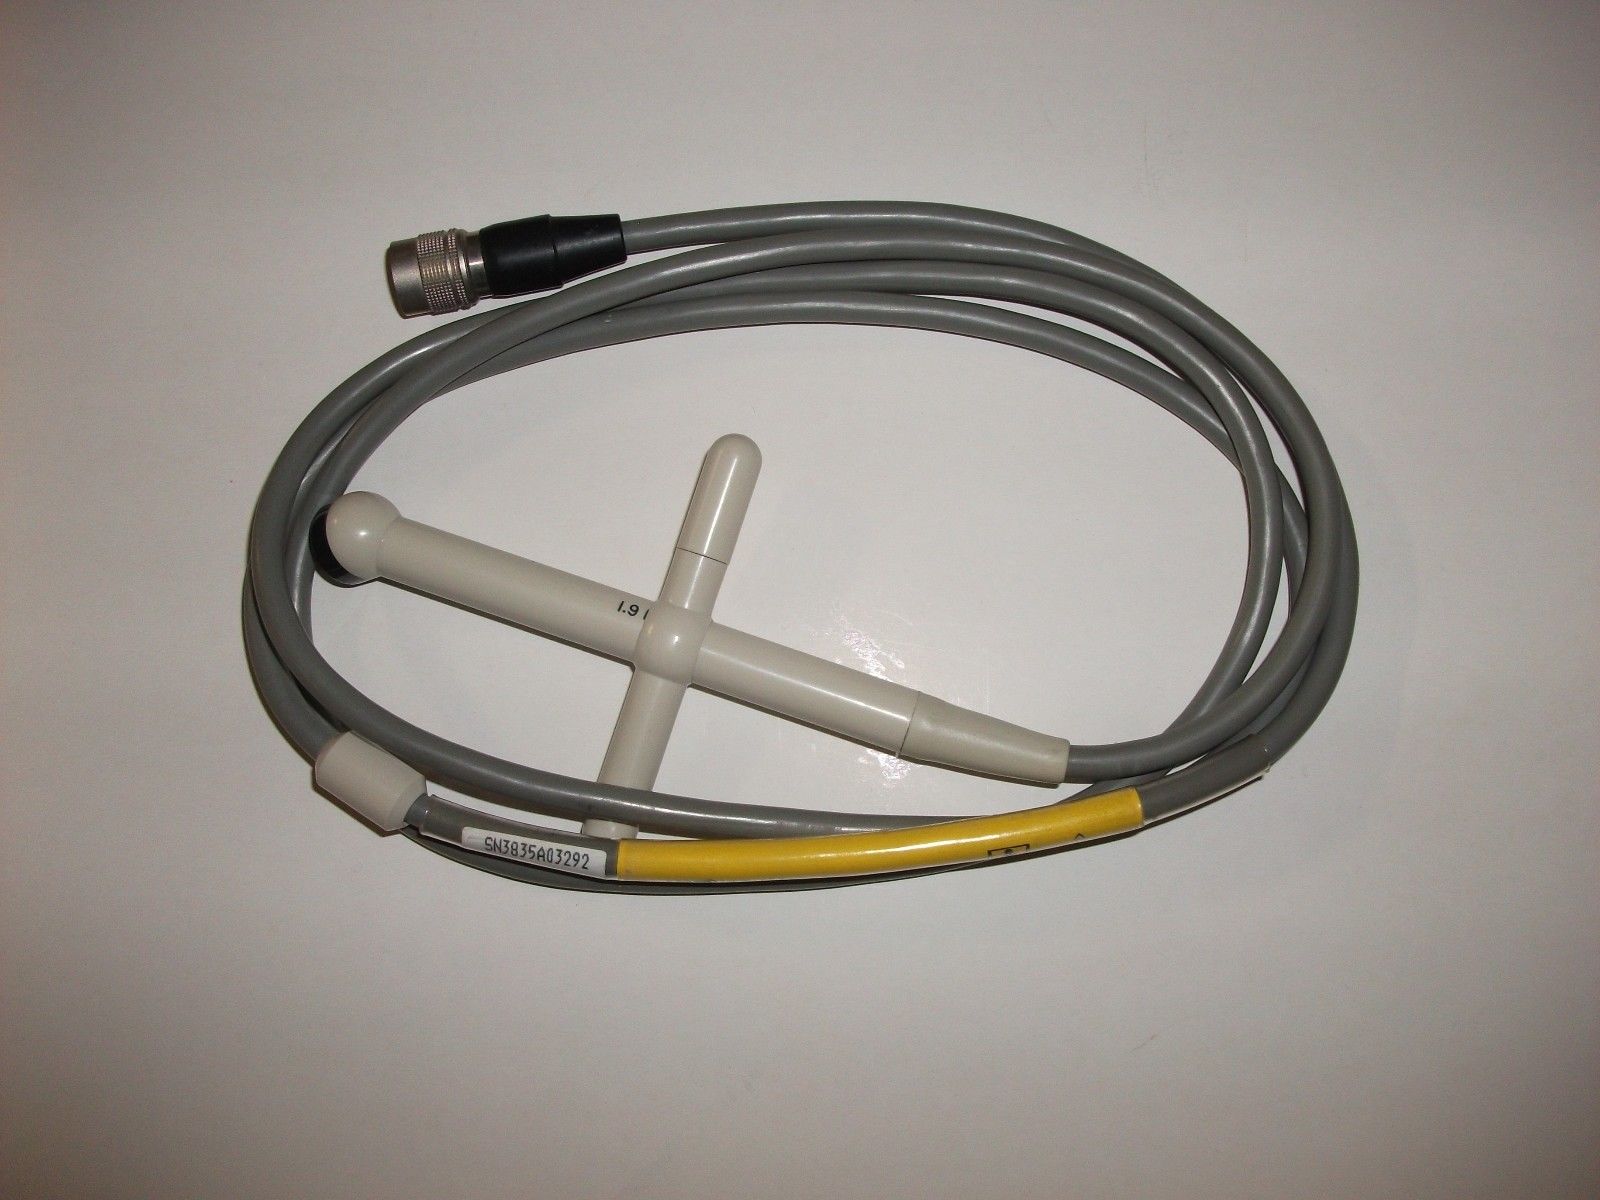 a yellow and gray hose connected to a white cord